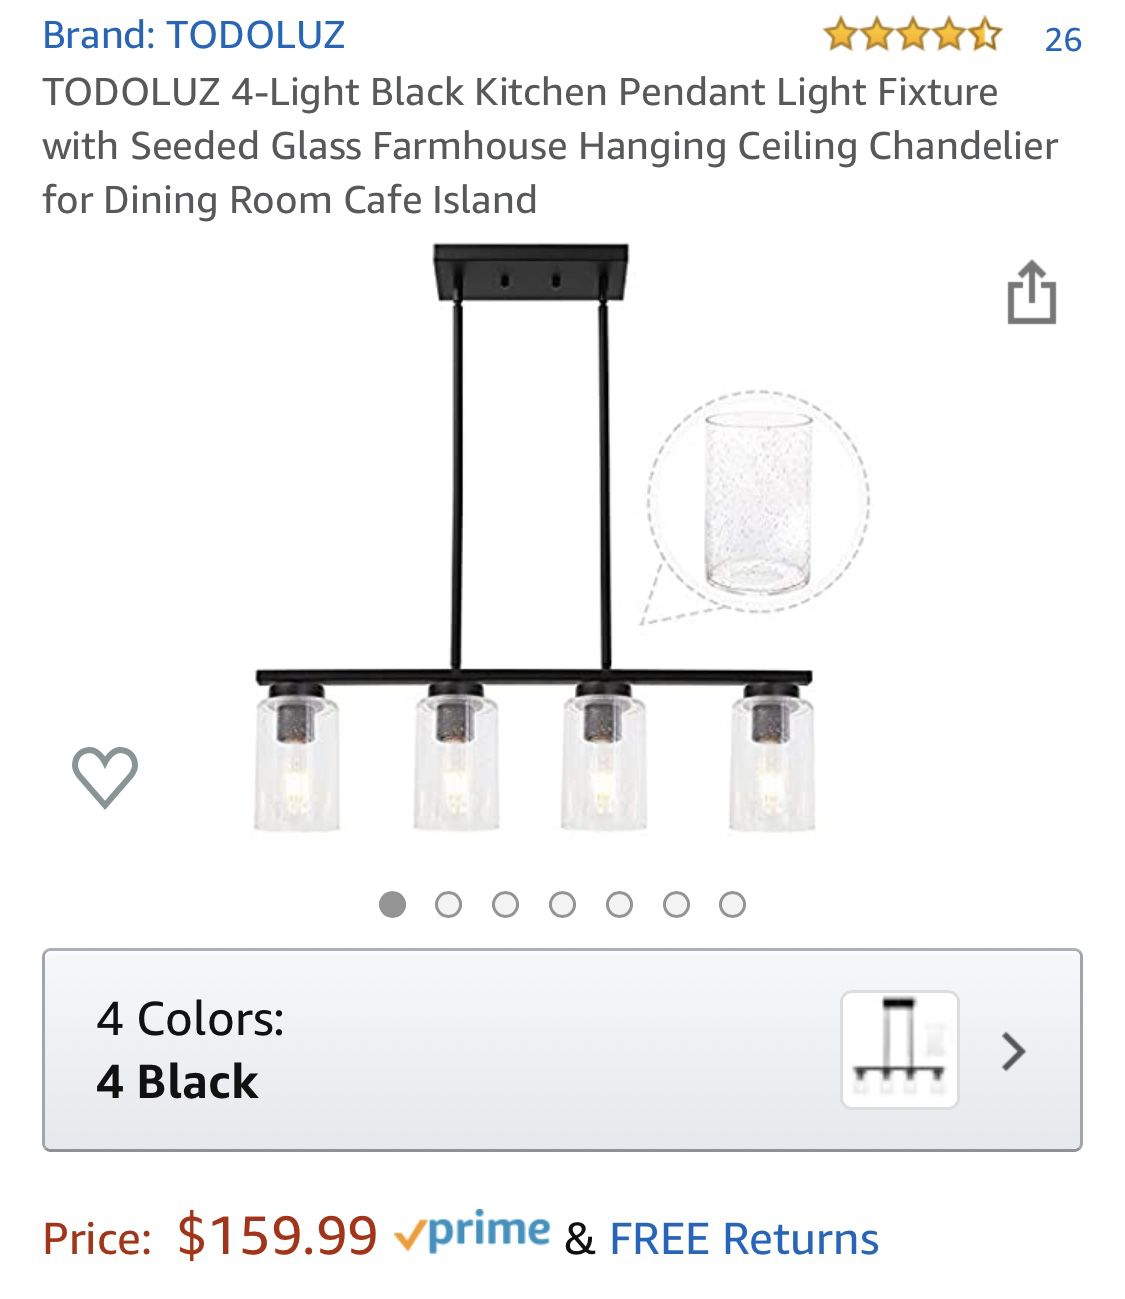 TODOLUZ 4-Light Black Kitchen Pendant Light Fixture with Seeded Glass Farmhouse Hanging Ceiling Chandelier for Dining Room Cafe Island